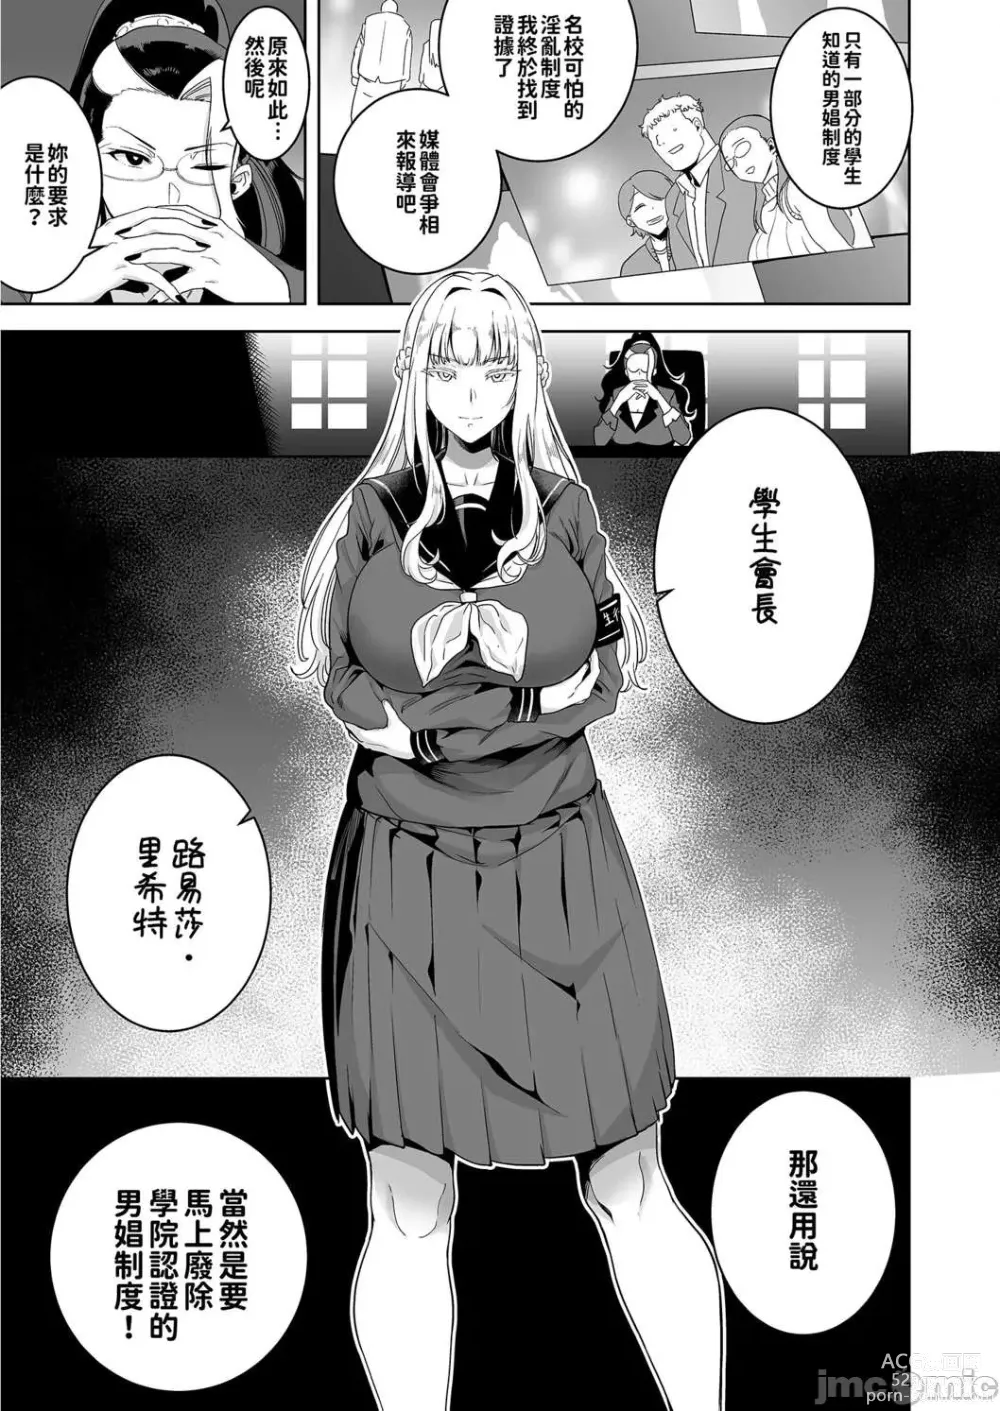 Page 41 of doujinshi 聖華女学院高等部公認竿おじさん 3